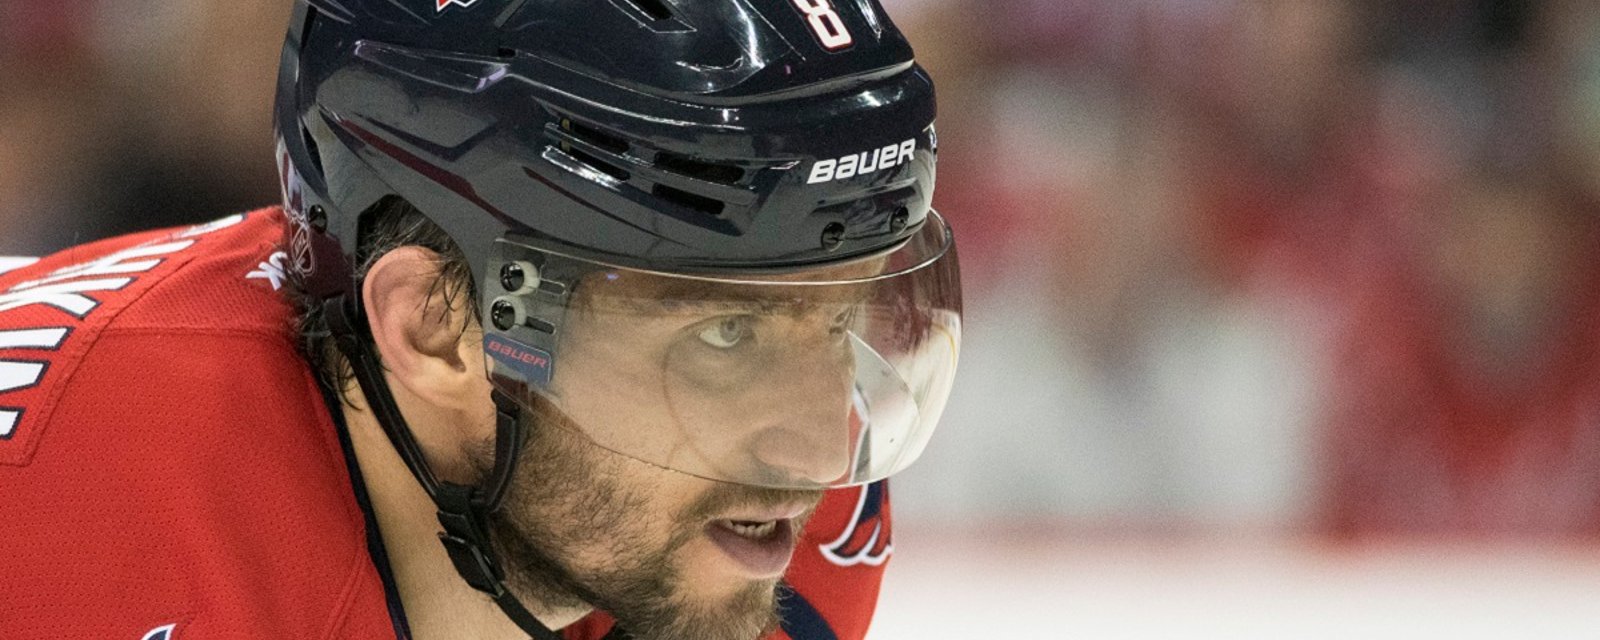 Alex Ovechkin reveals the team he cheered for growing up.